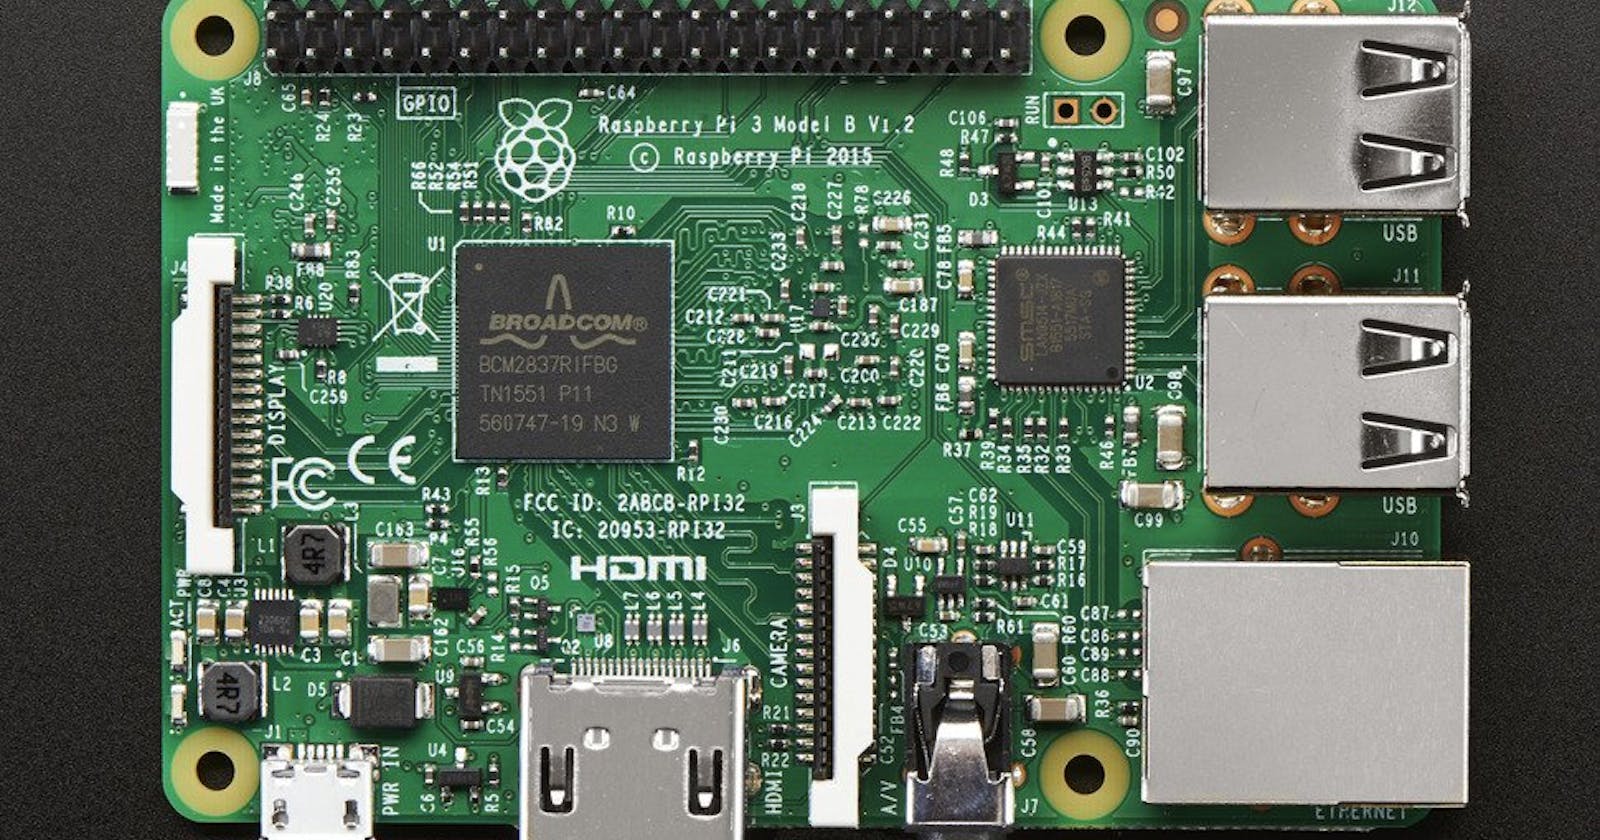 Raspberry PI 3B(32 bites) Board BSP(Board Support Package) Execution Instruction.